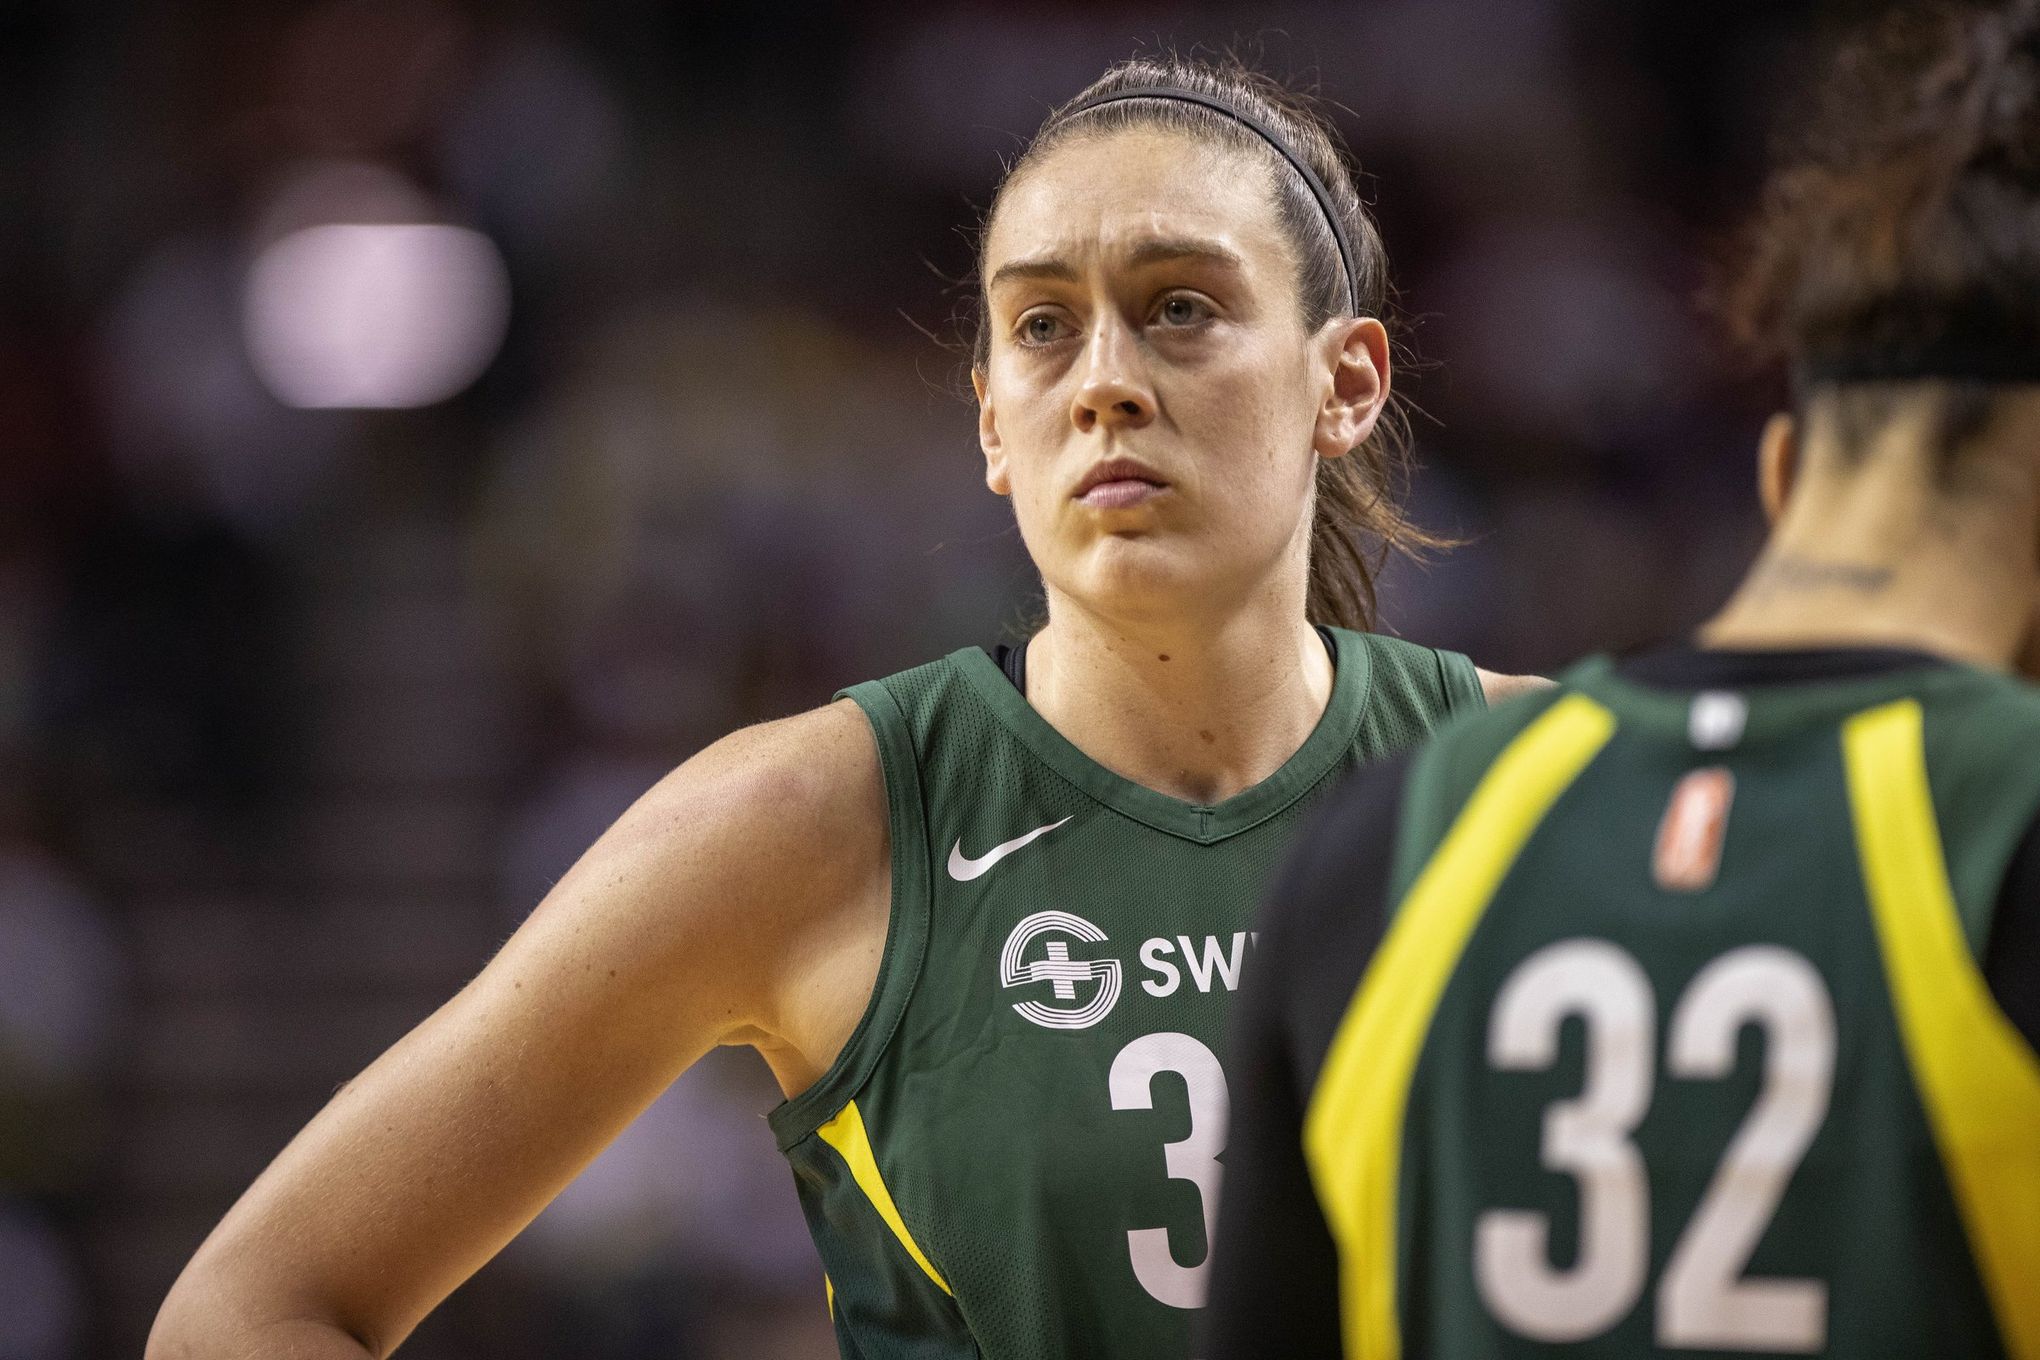 Seattle Storm: Breanna Stewart to Join Dynamo Kursk After 2018